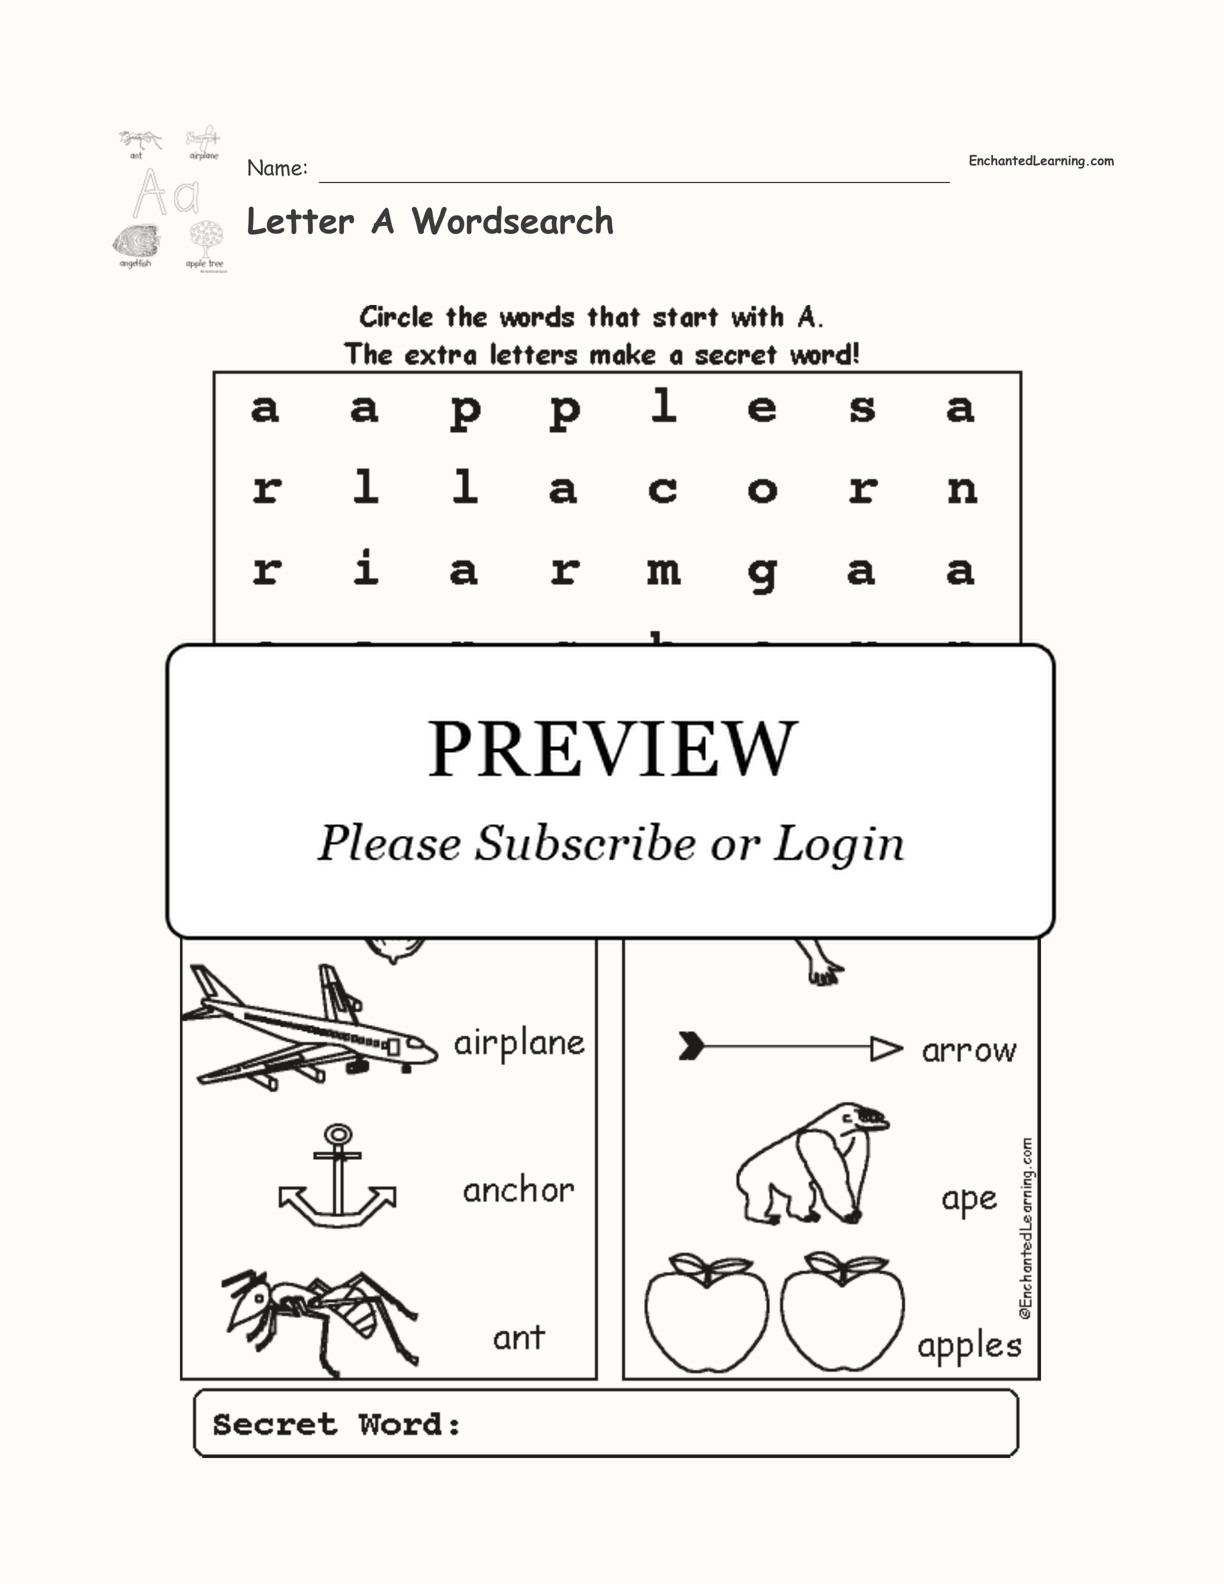 Letter A Wordsearch interactive worksheet page 1